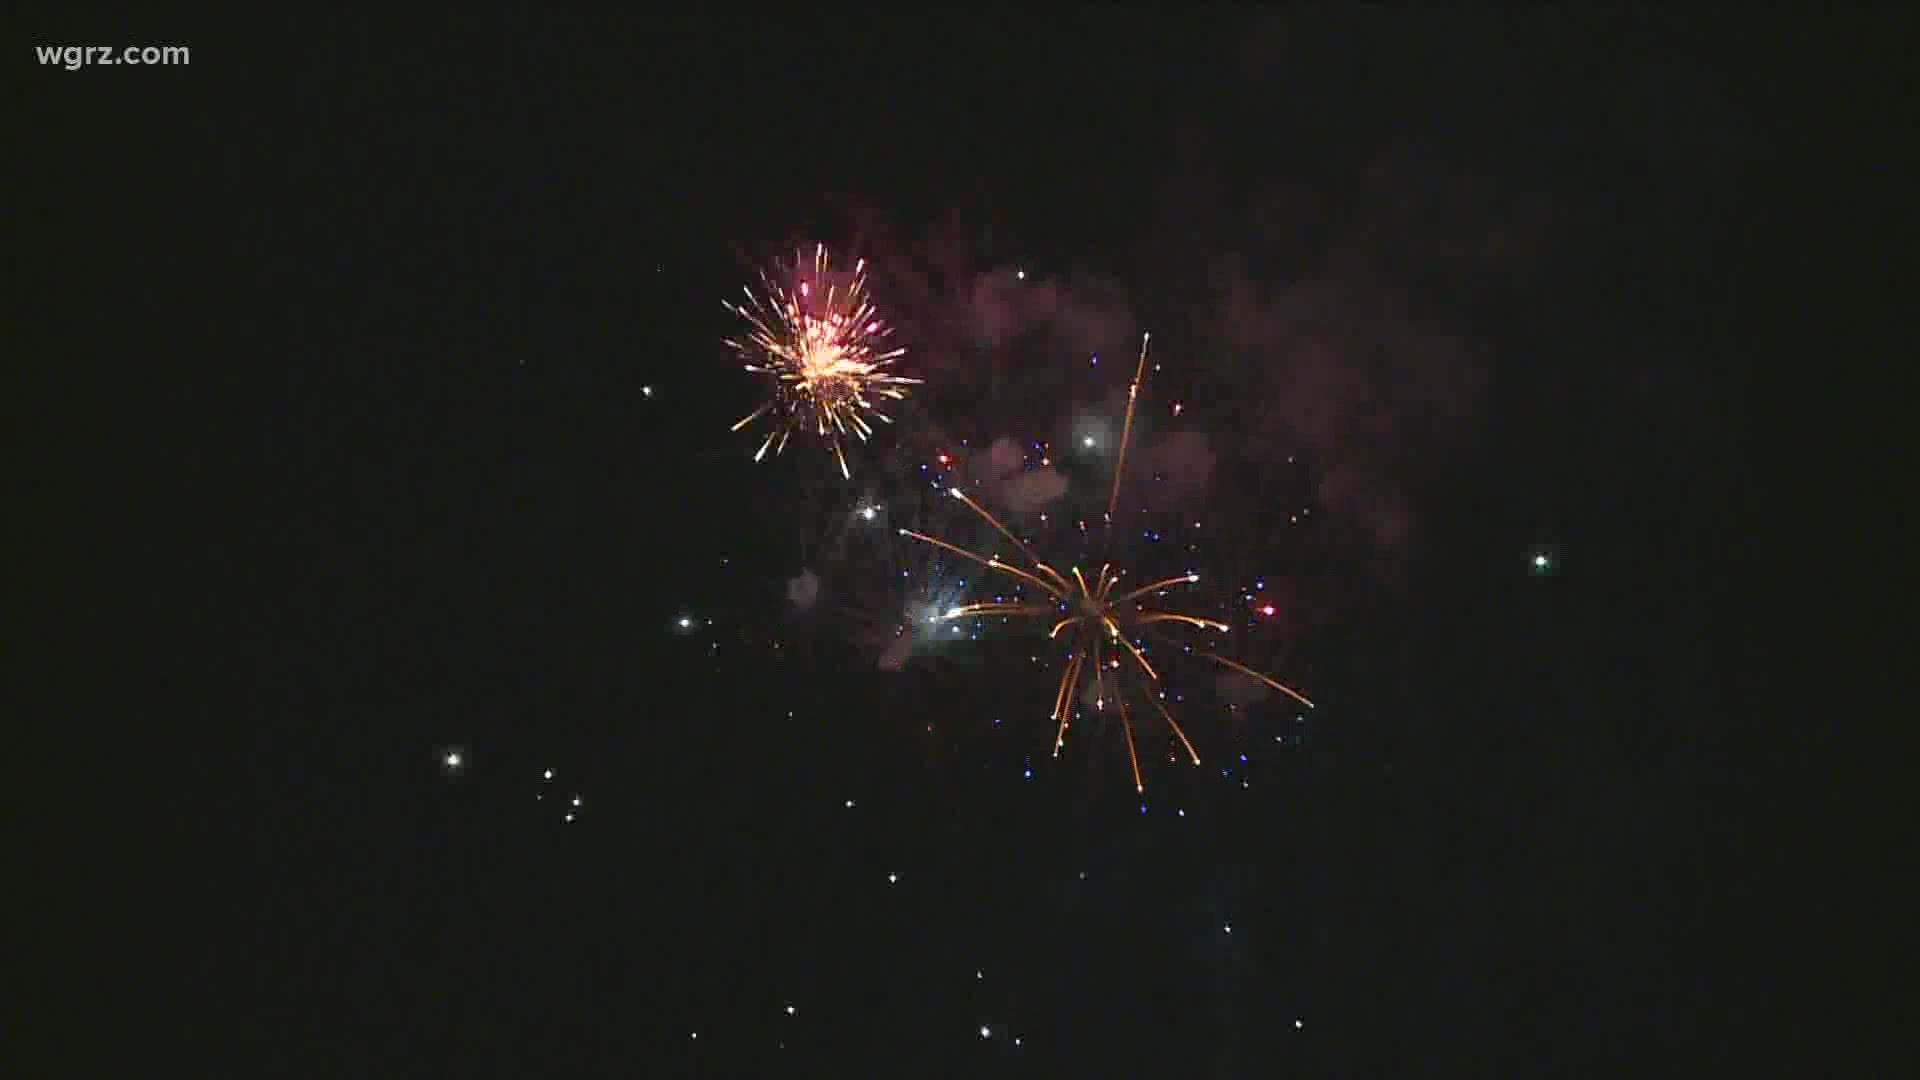 With concerns about people setting off their own fireworks because of Covid-19, city leaders are urging people to use caution.